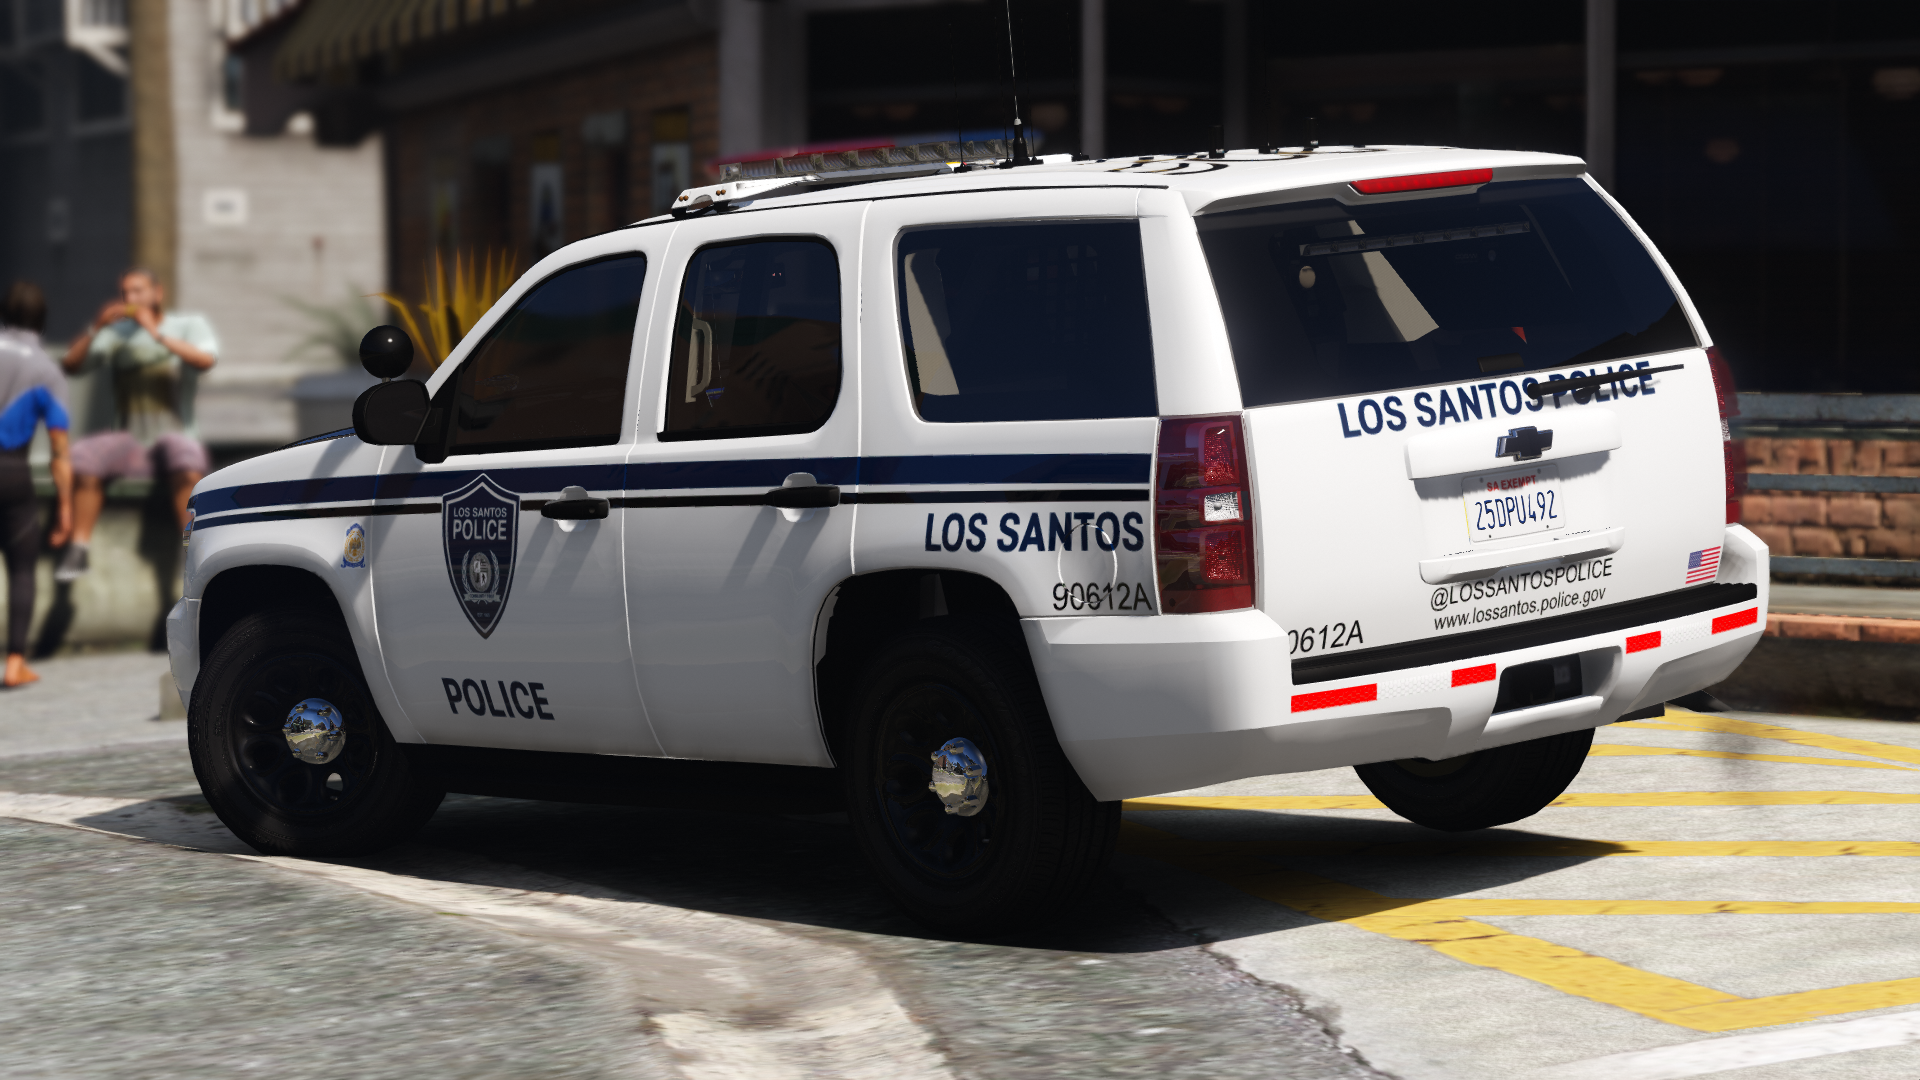 Grand Theft Auto V 14_02_2022 15_51_27.png